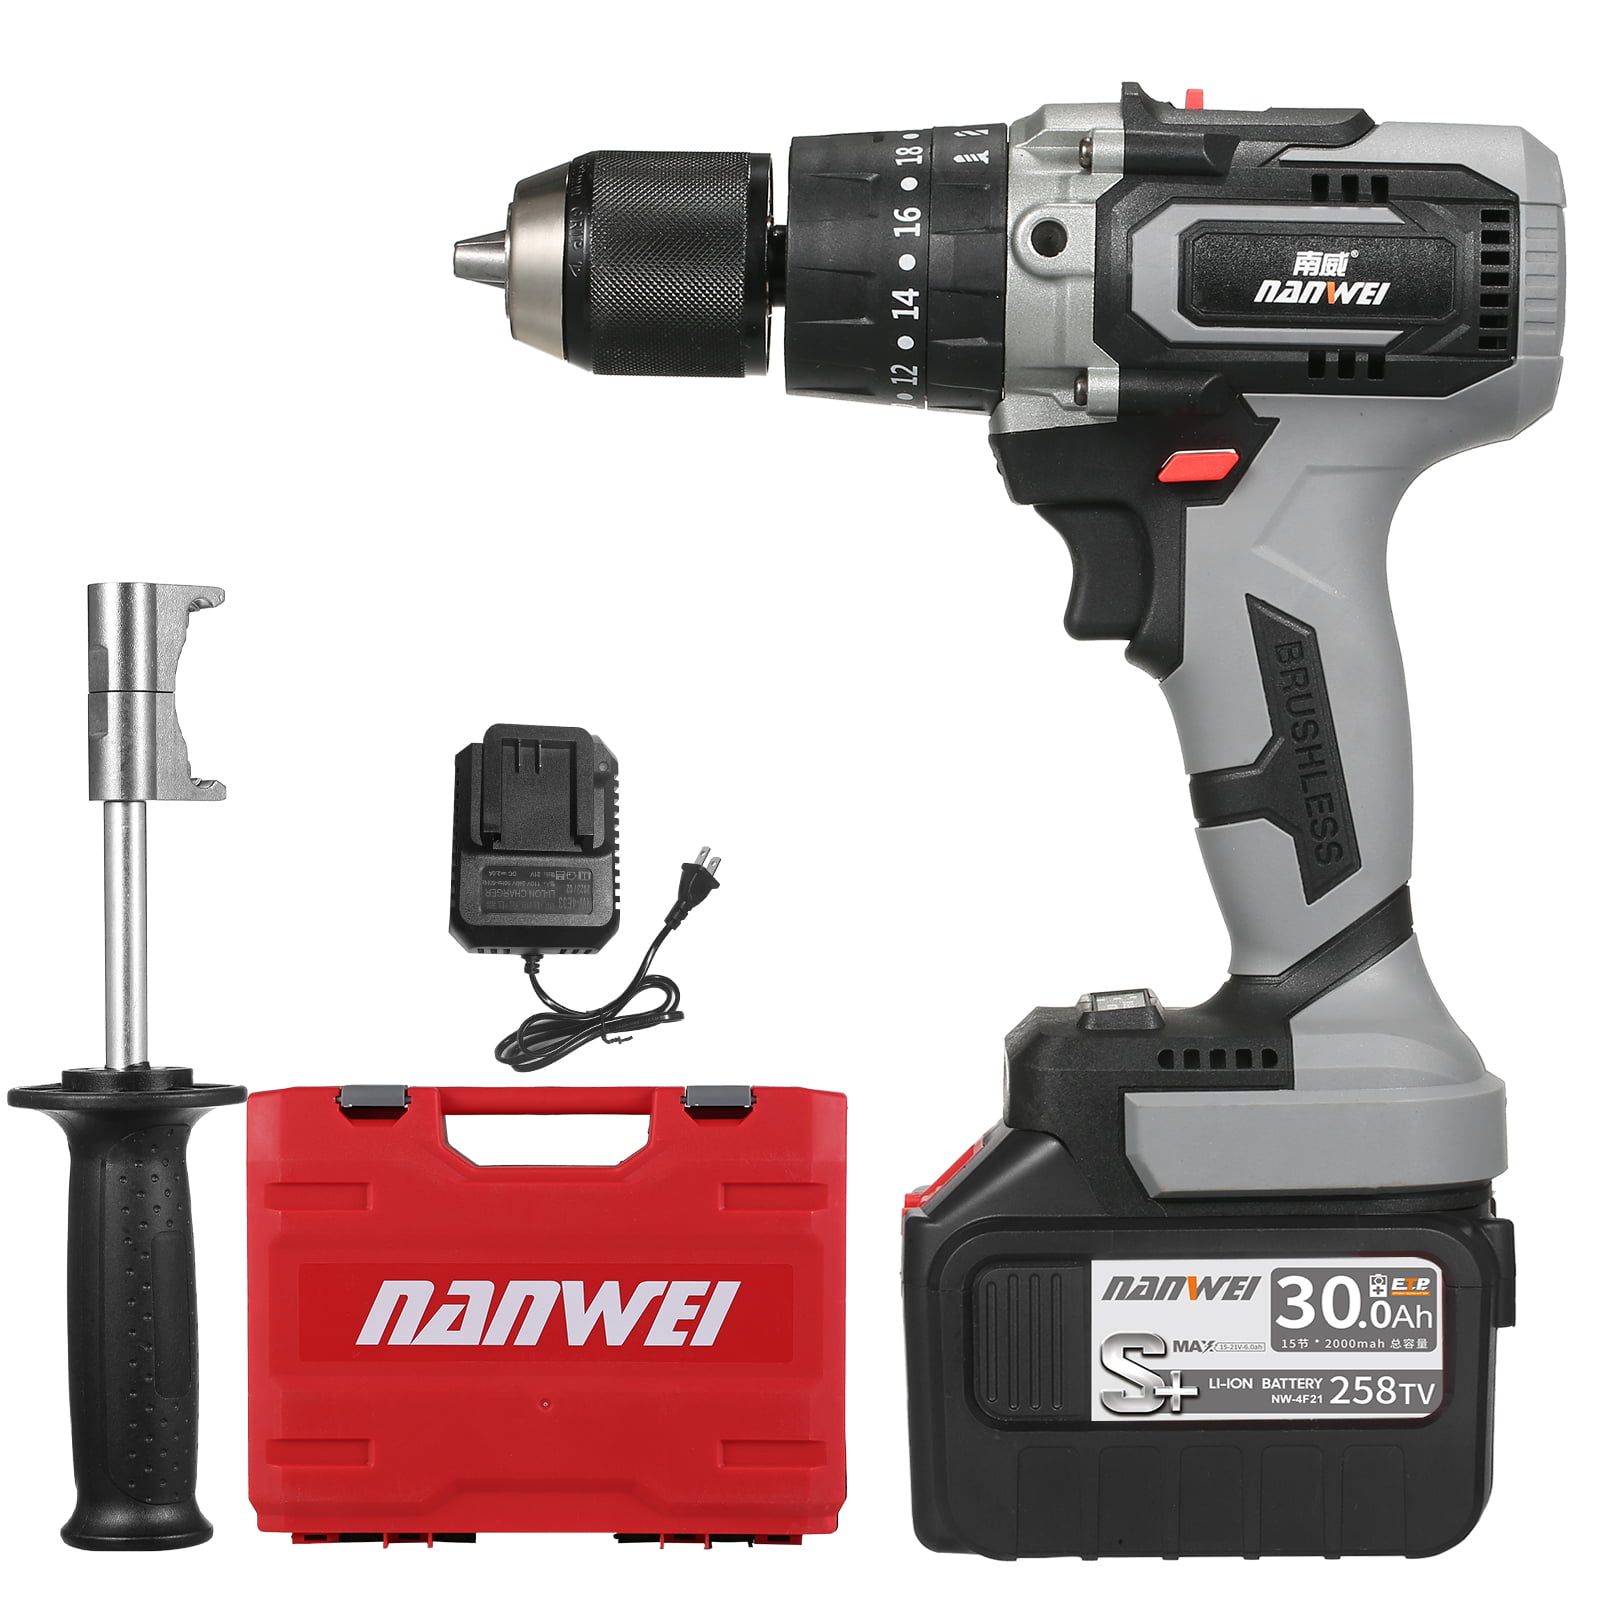 OWSOO 21V Cordless Drill Driver Batteries Max Torque 20+3 Position  0-2150RMP Variable Speed Impact Hammer Drill Screwdriver With PlasticTool  Box